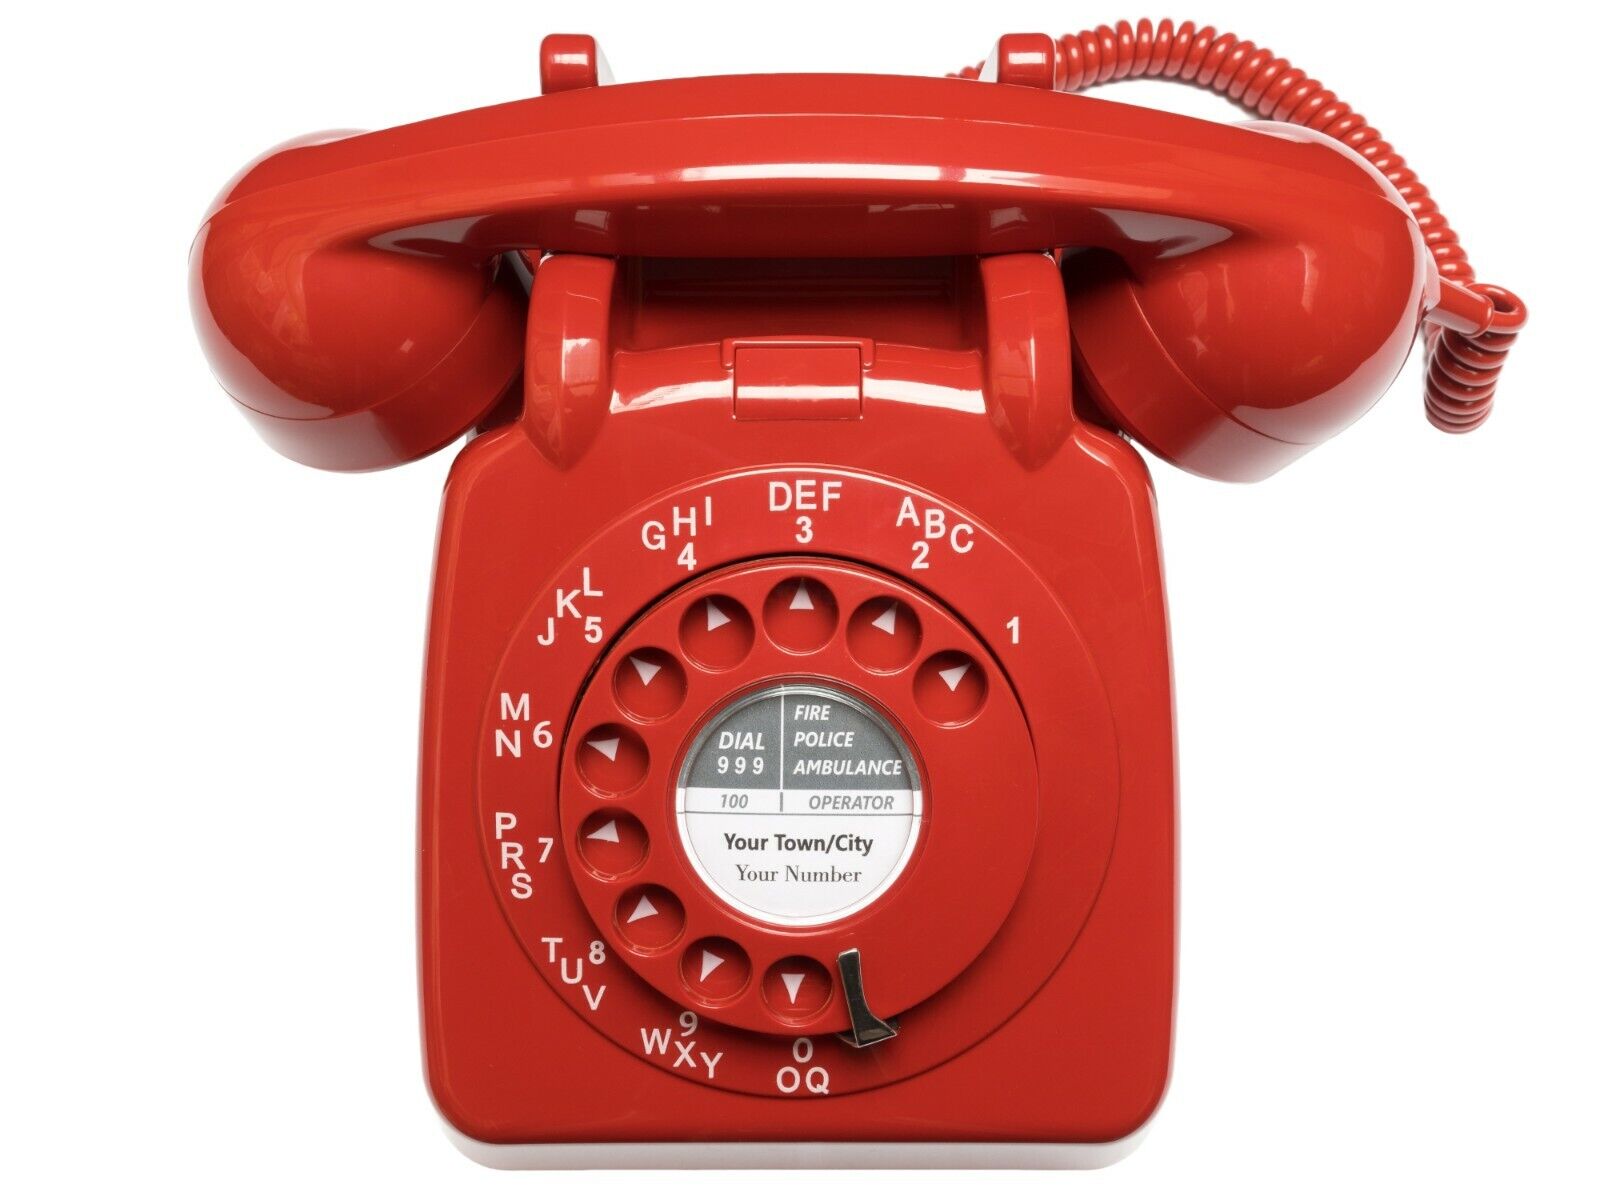 Vintage 1960s Retro GPO 706 Dial Telephone - Lacquer Red - Fully Refurbished